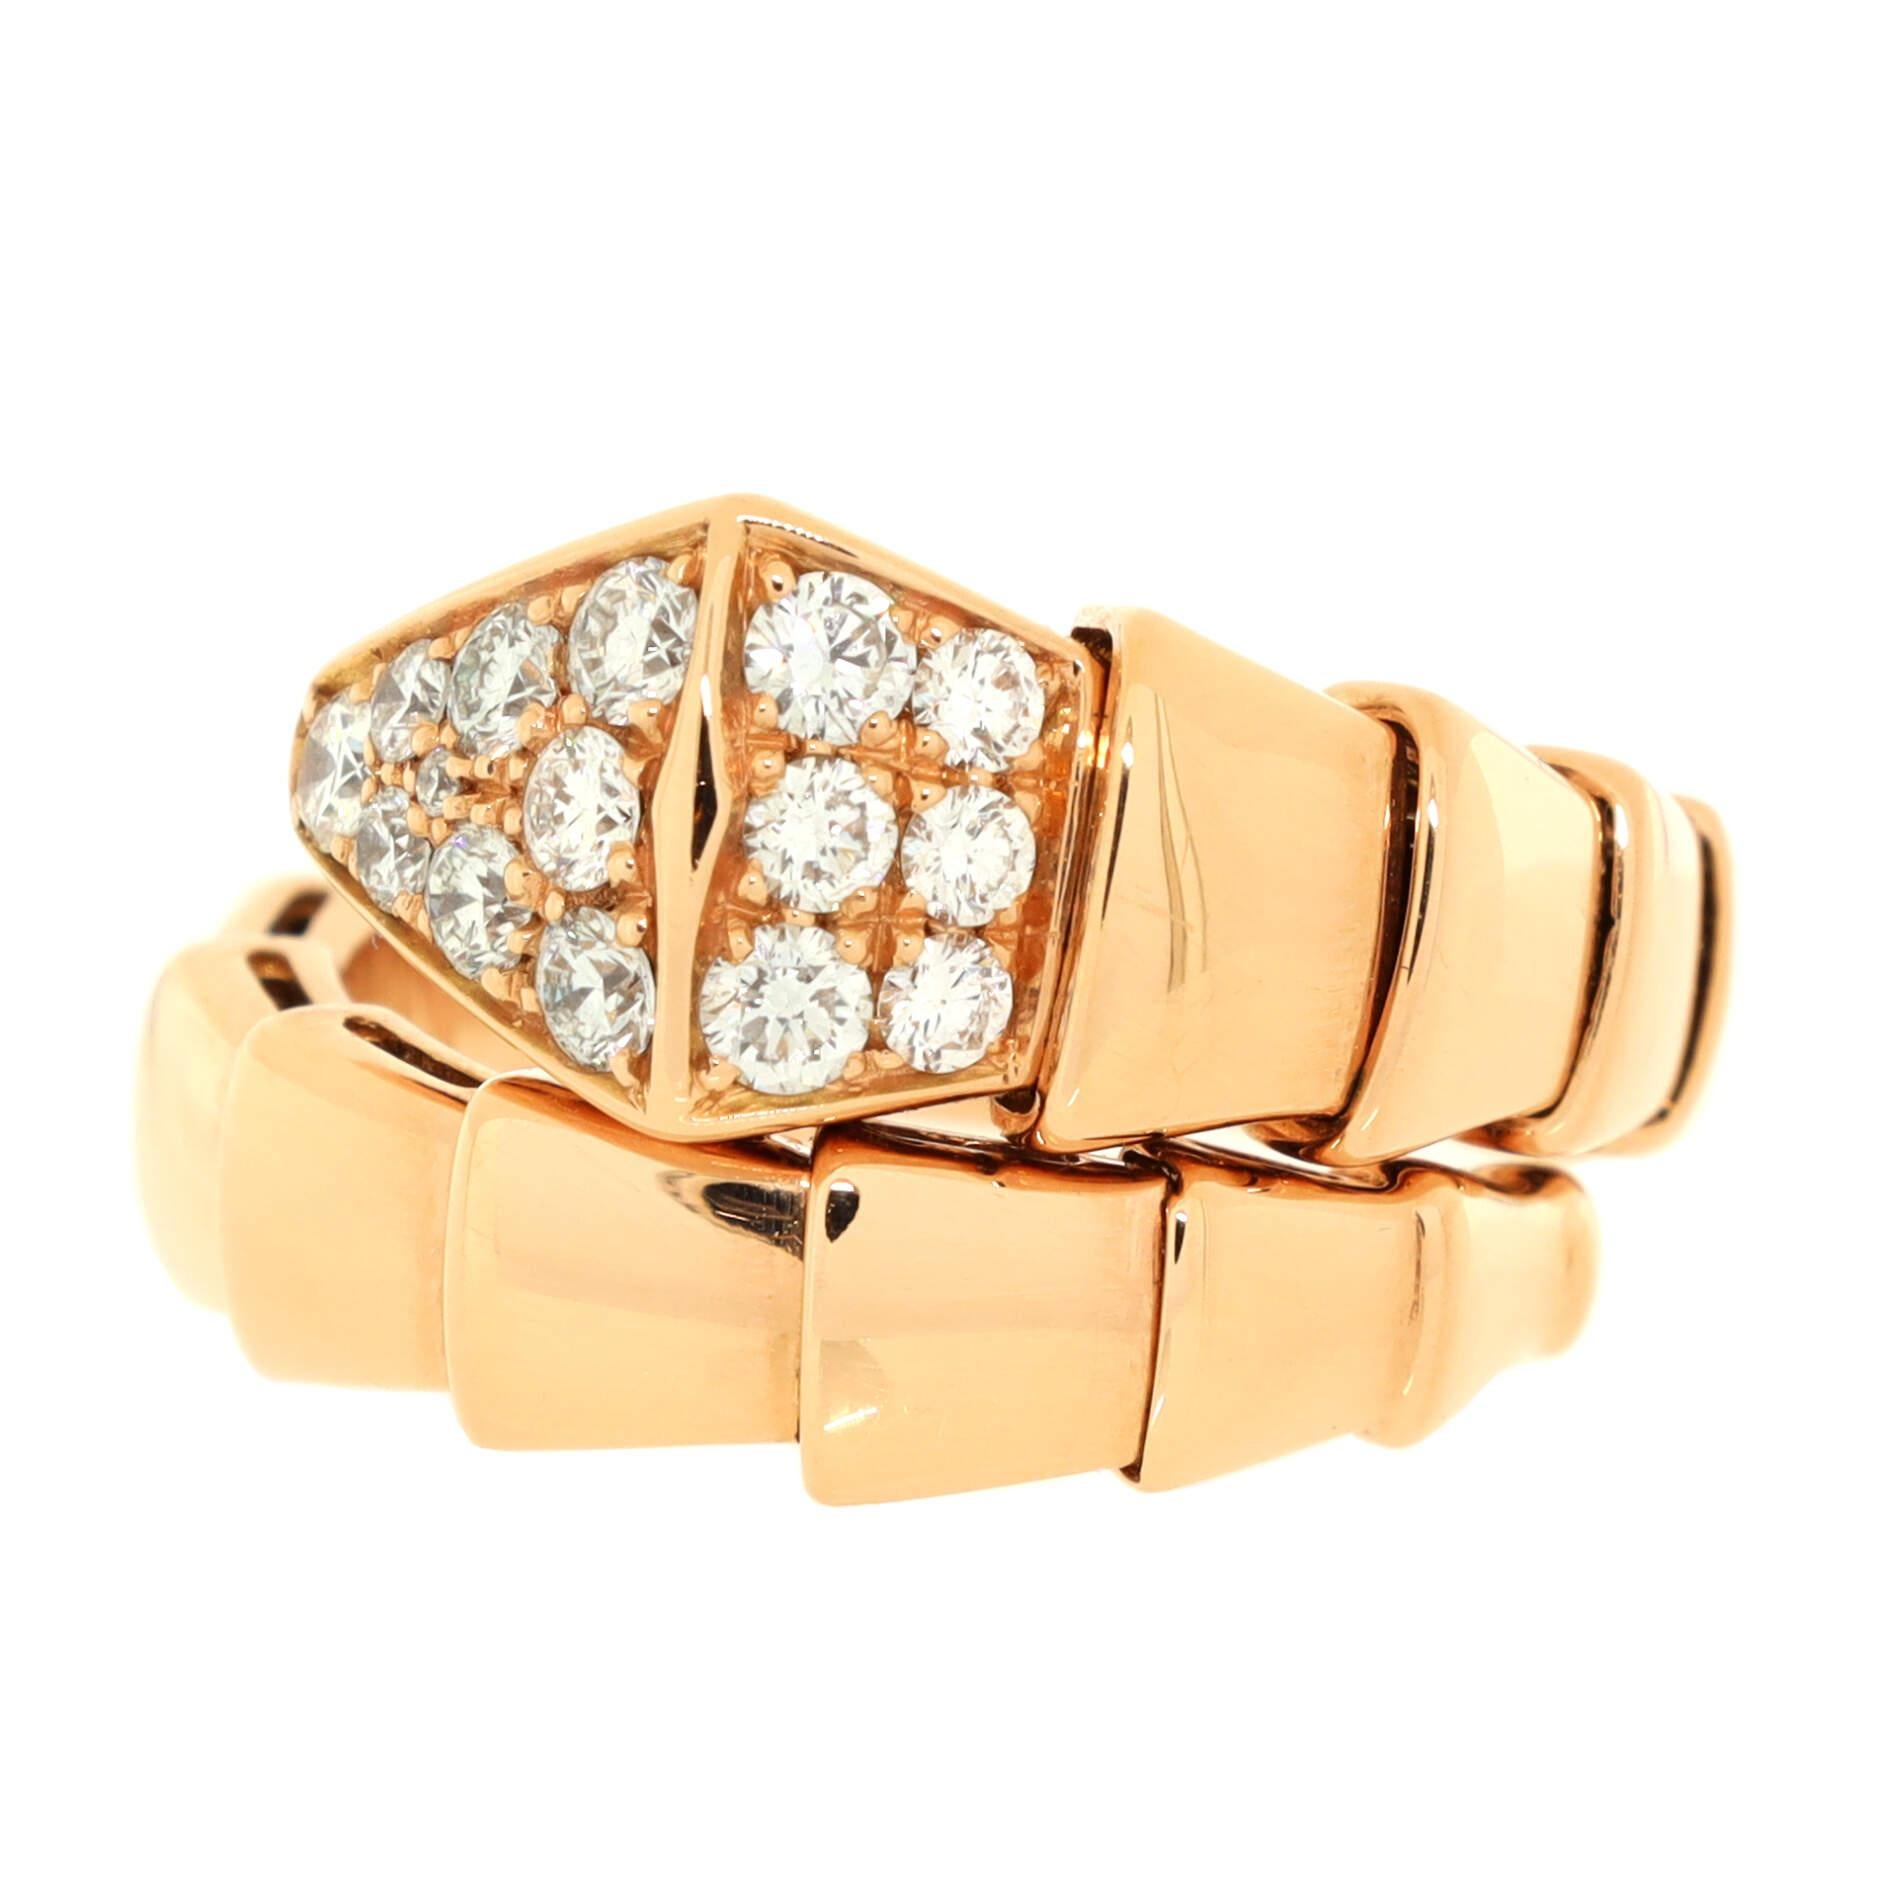 Condition: Great. Minor wear throughout.
Accessories: No Accessories
Measurements: Size: 5.5, Width: 5.25 mm
Designer: Bvlgari
Model: Serpenti Viper One-Coil Ring 18K Rose Gold with Diamonds
Exterior Color: Rose Gold
Item Number: 213721/358